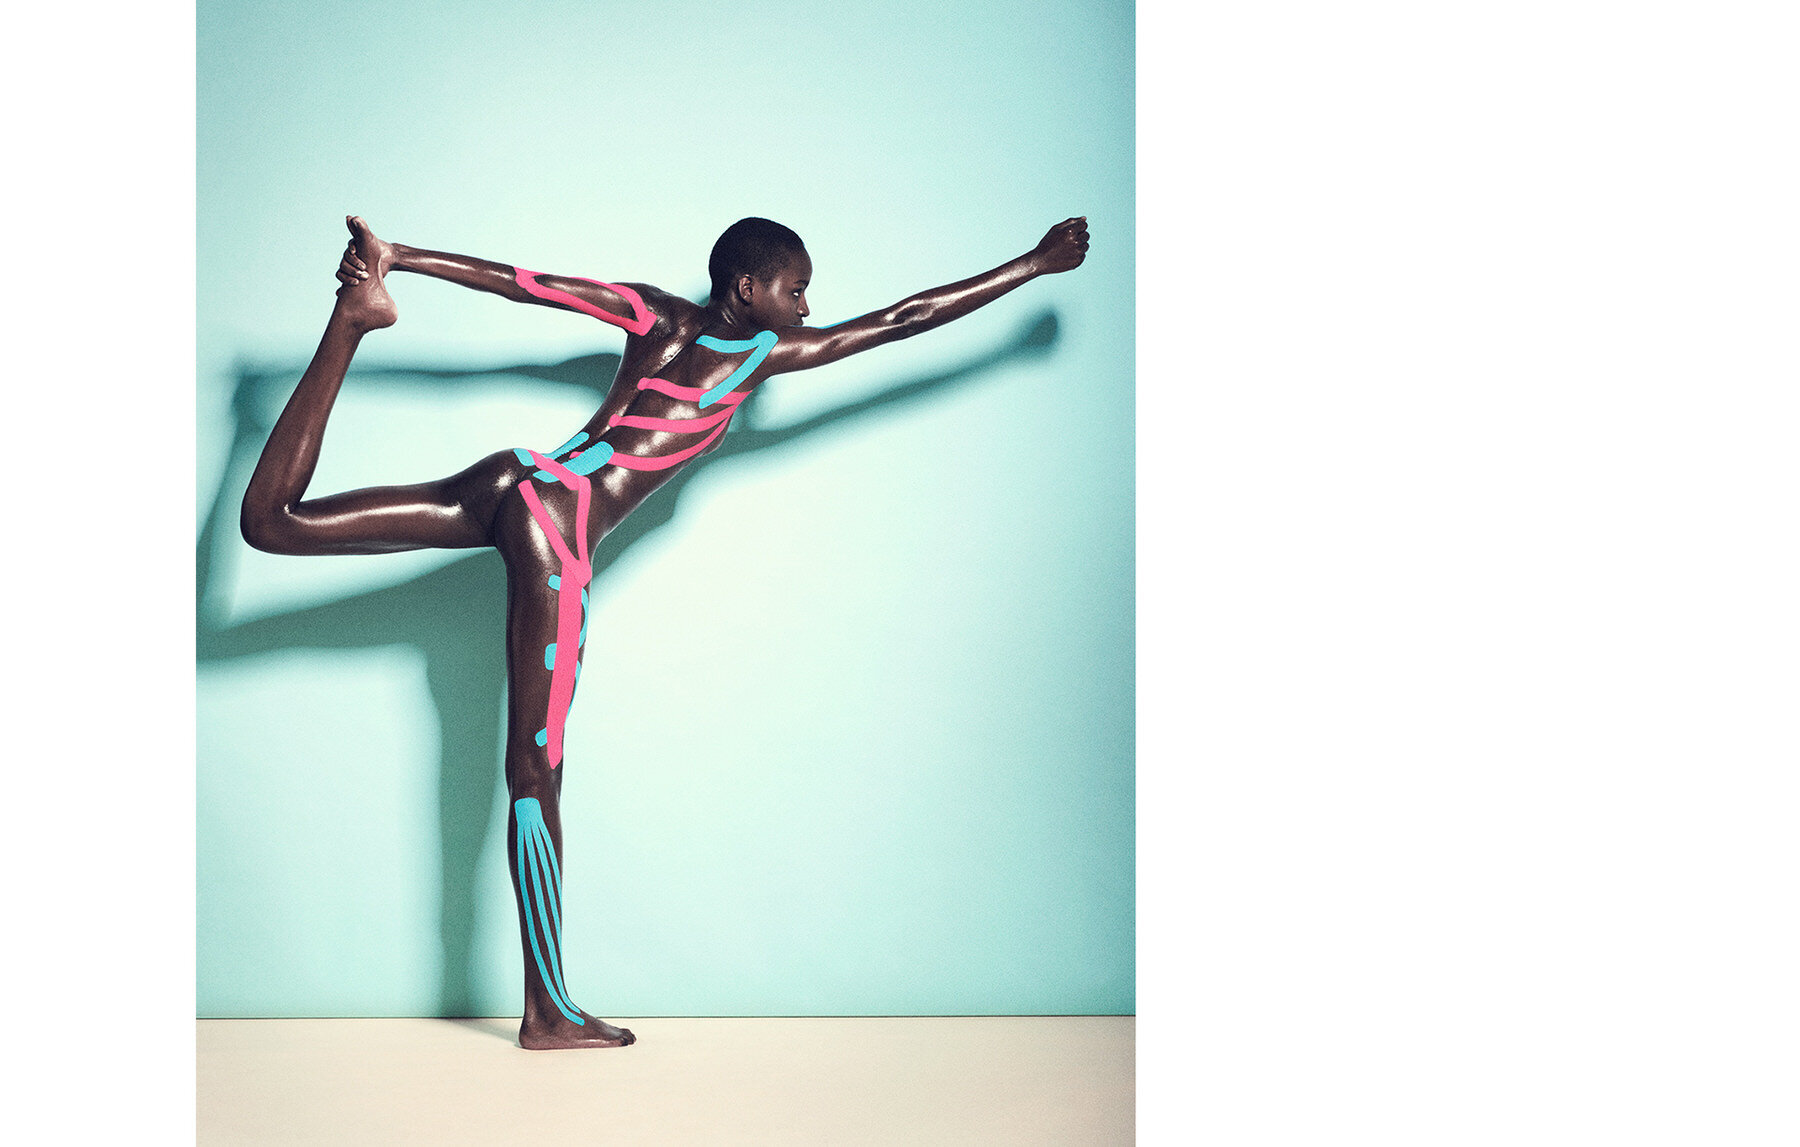  Taking inspiration from Jean-Paul Goude’s photocollage of Grace Jones  1978.  This image was shot for a Kinesiology tape editorial for the ES Magazine.   ES Magazine    